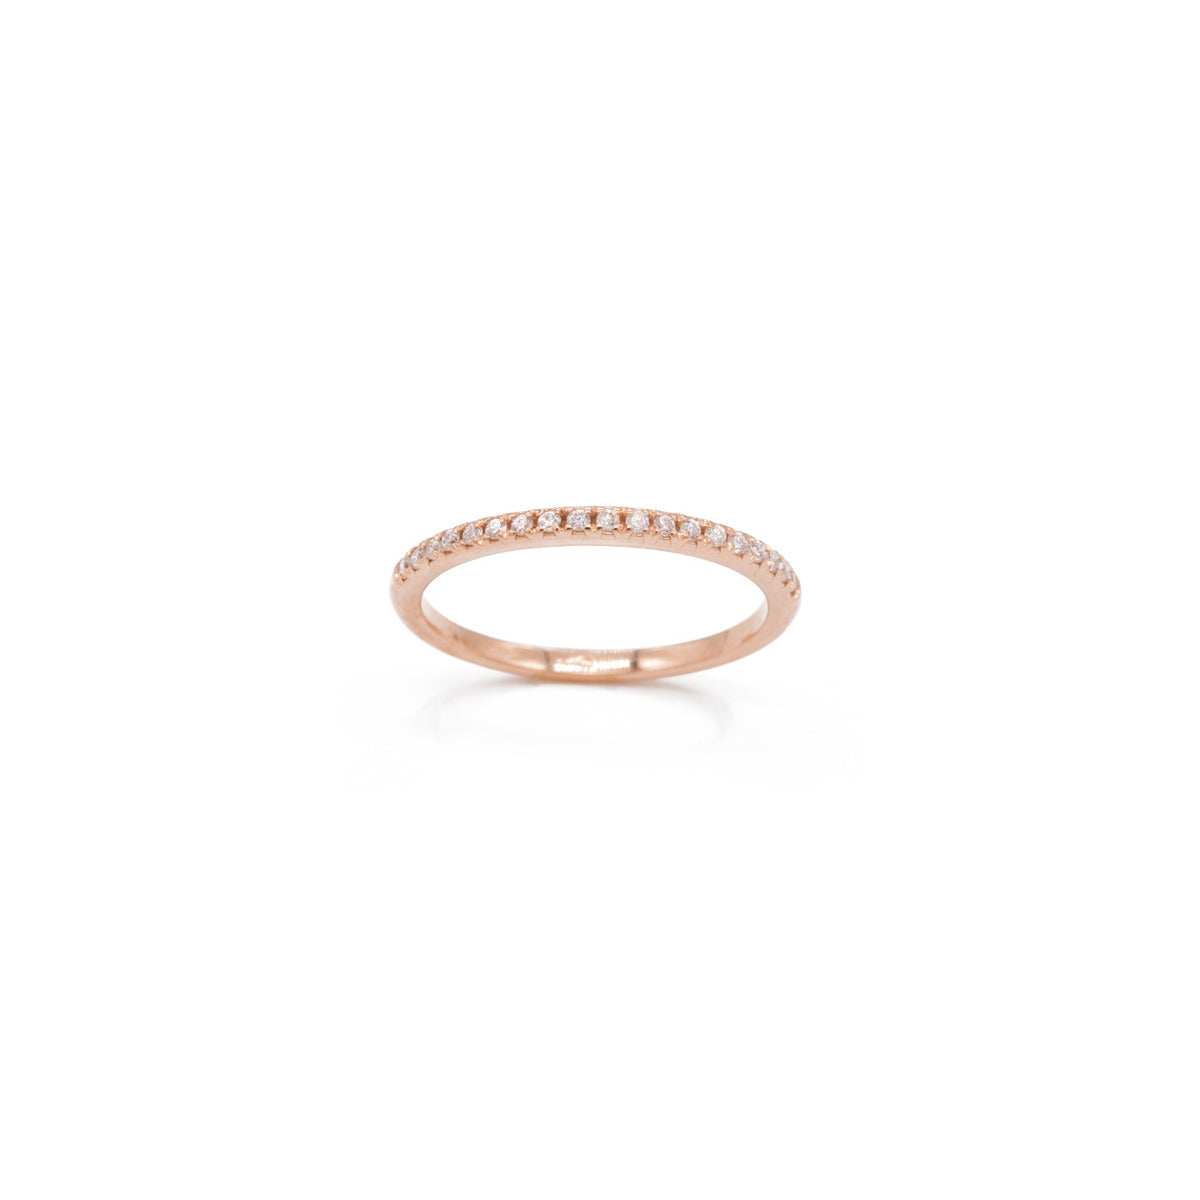 Rose gold wedding ring with diamonds